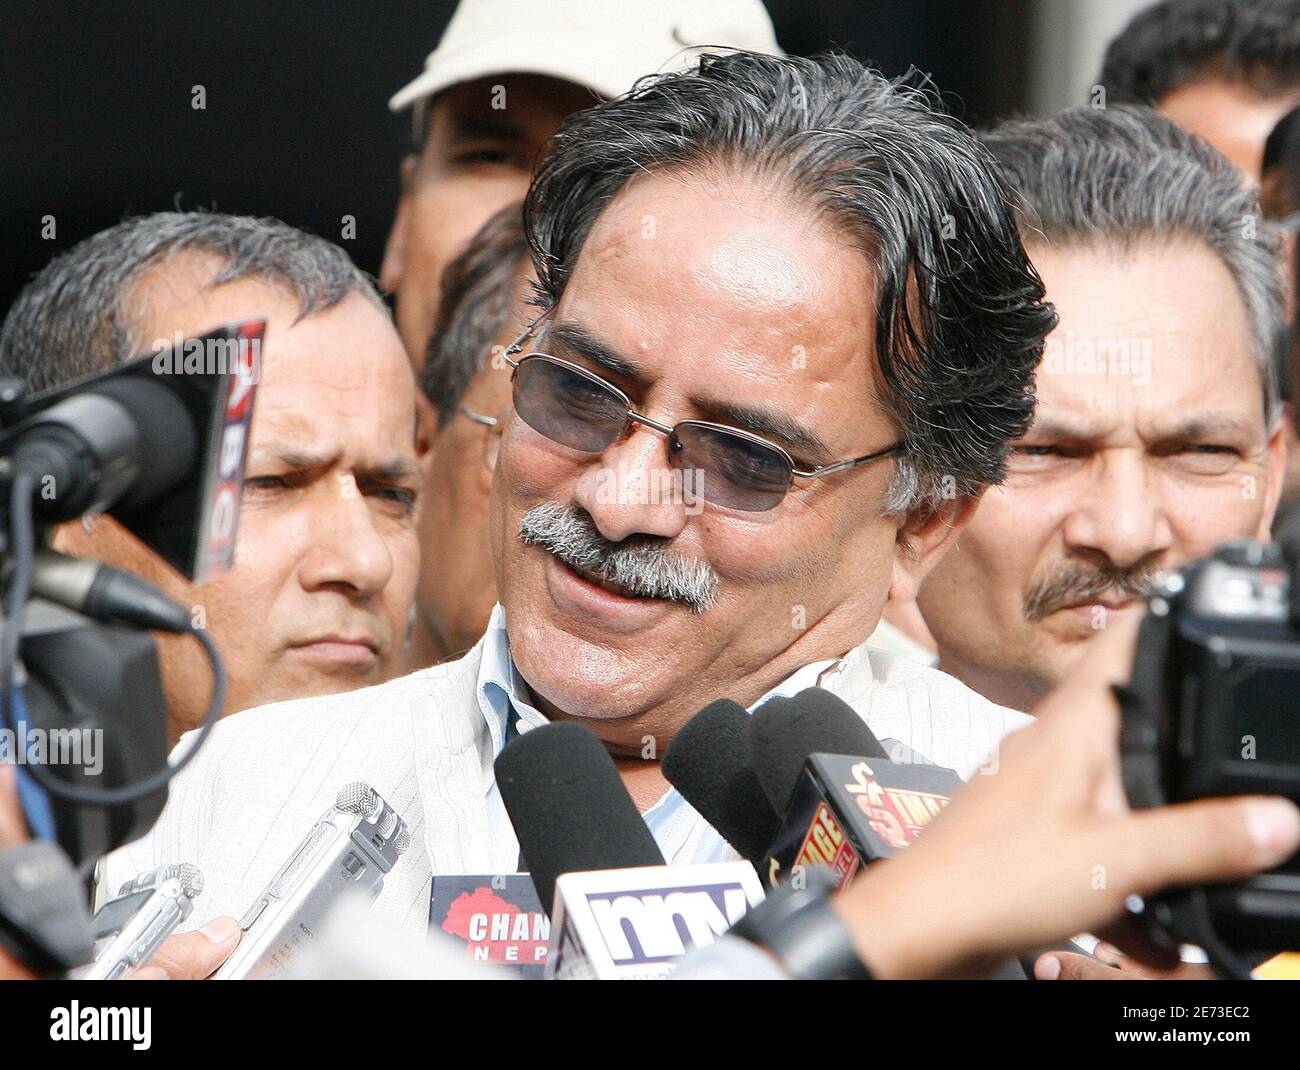 Maoist leader Prachanda (C) talks to the media after filing his nomination  for the post of Prime Minister, in Kathmandu August 14, 2008. A special  assembly in Nepal will elect a new